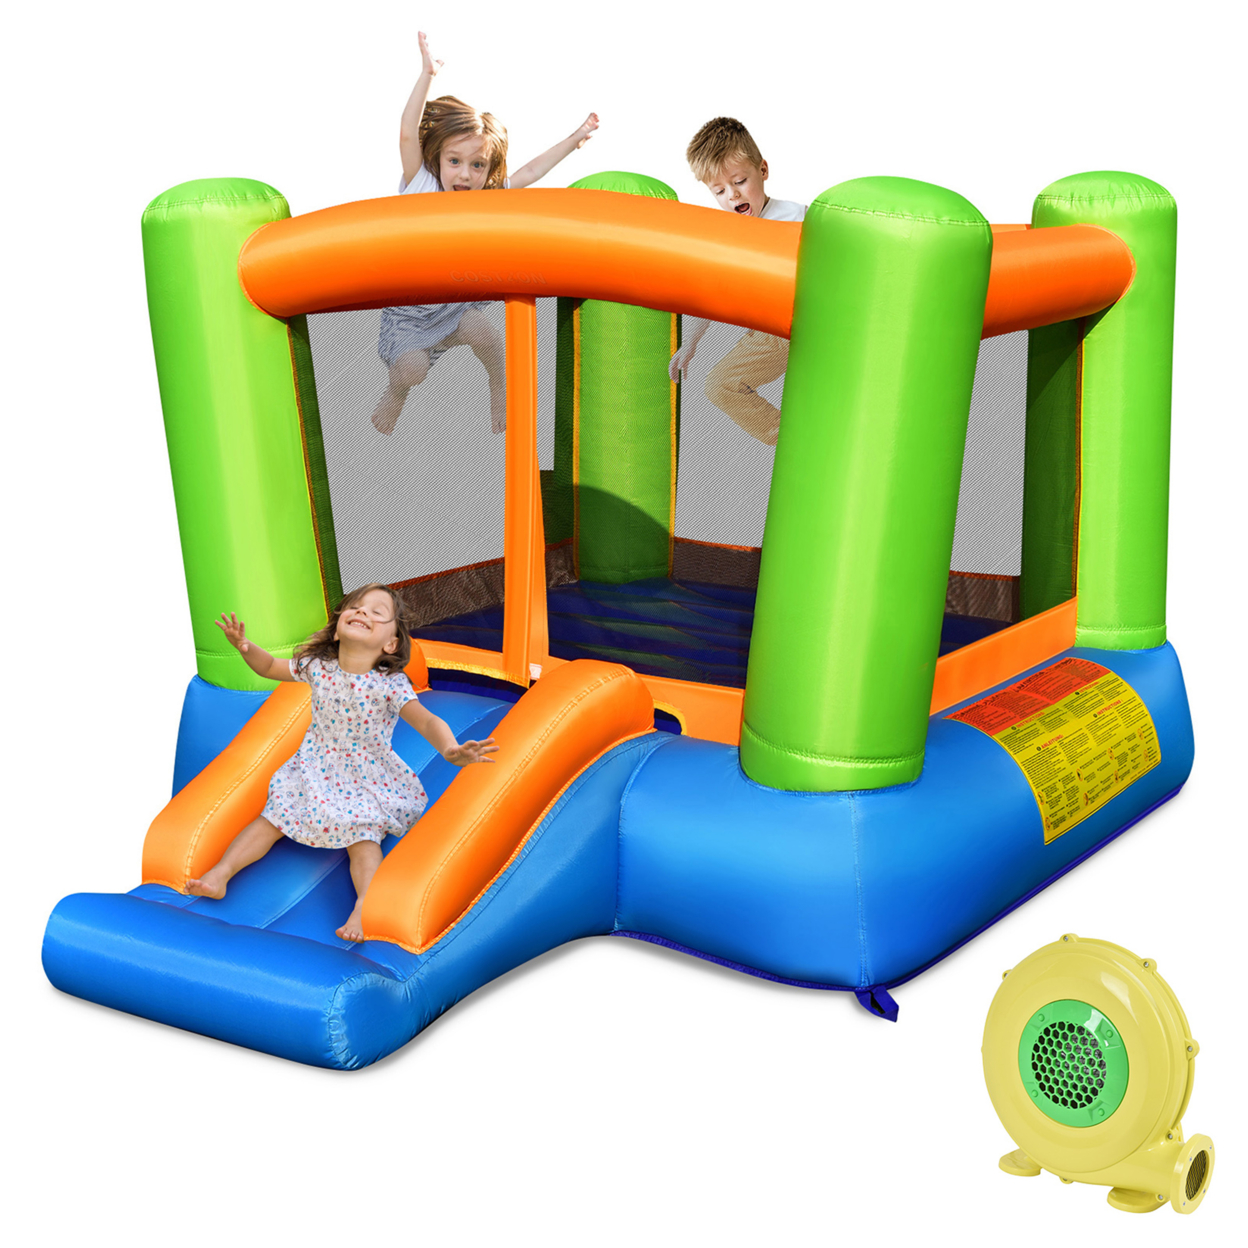 Inflatable Bounce House Kids Jumping Playhouse Indoor & Outdoor With 480W Blower